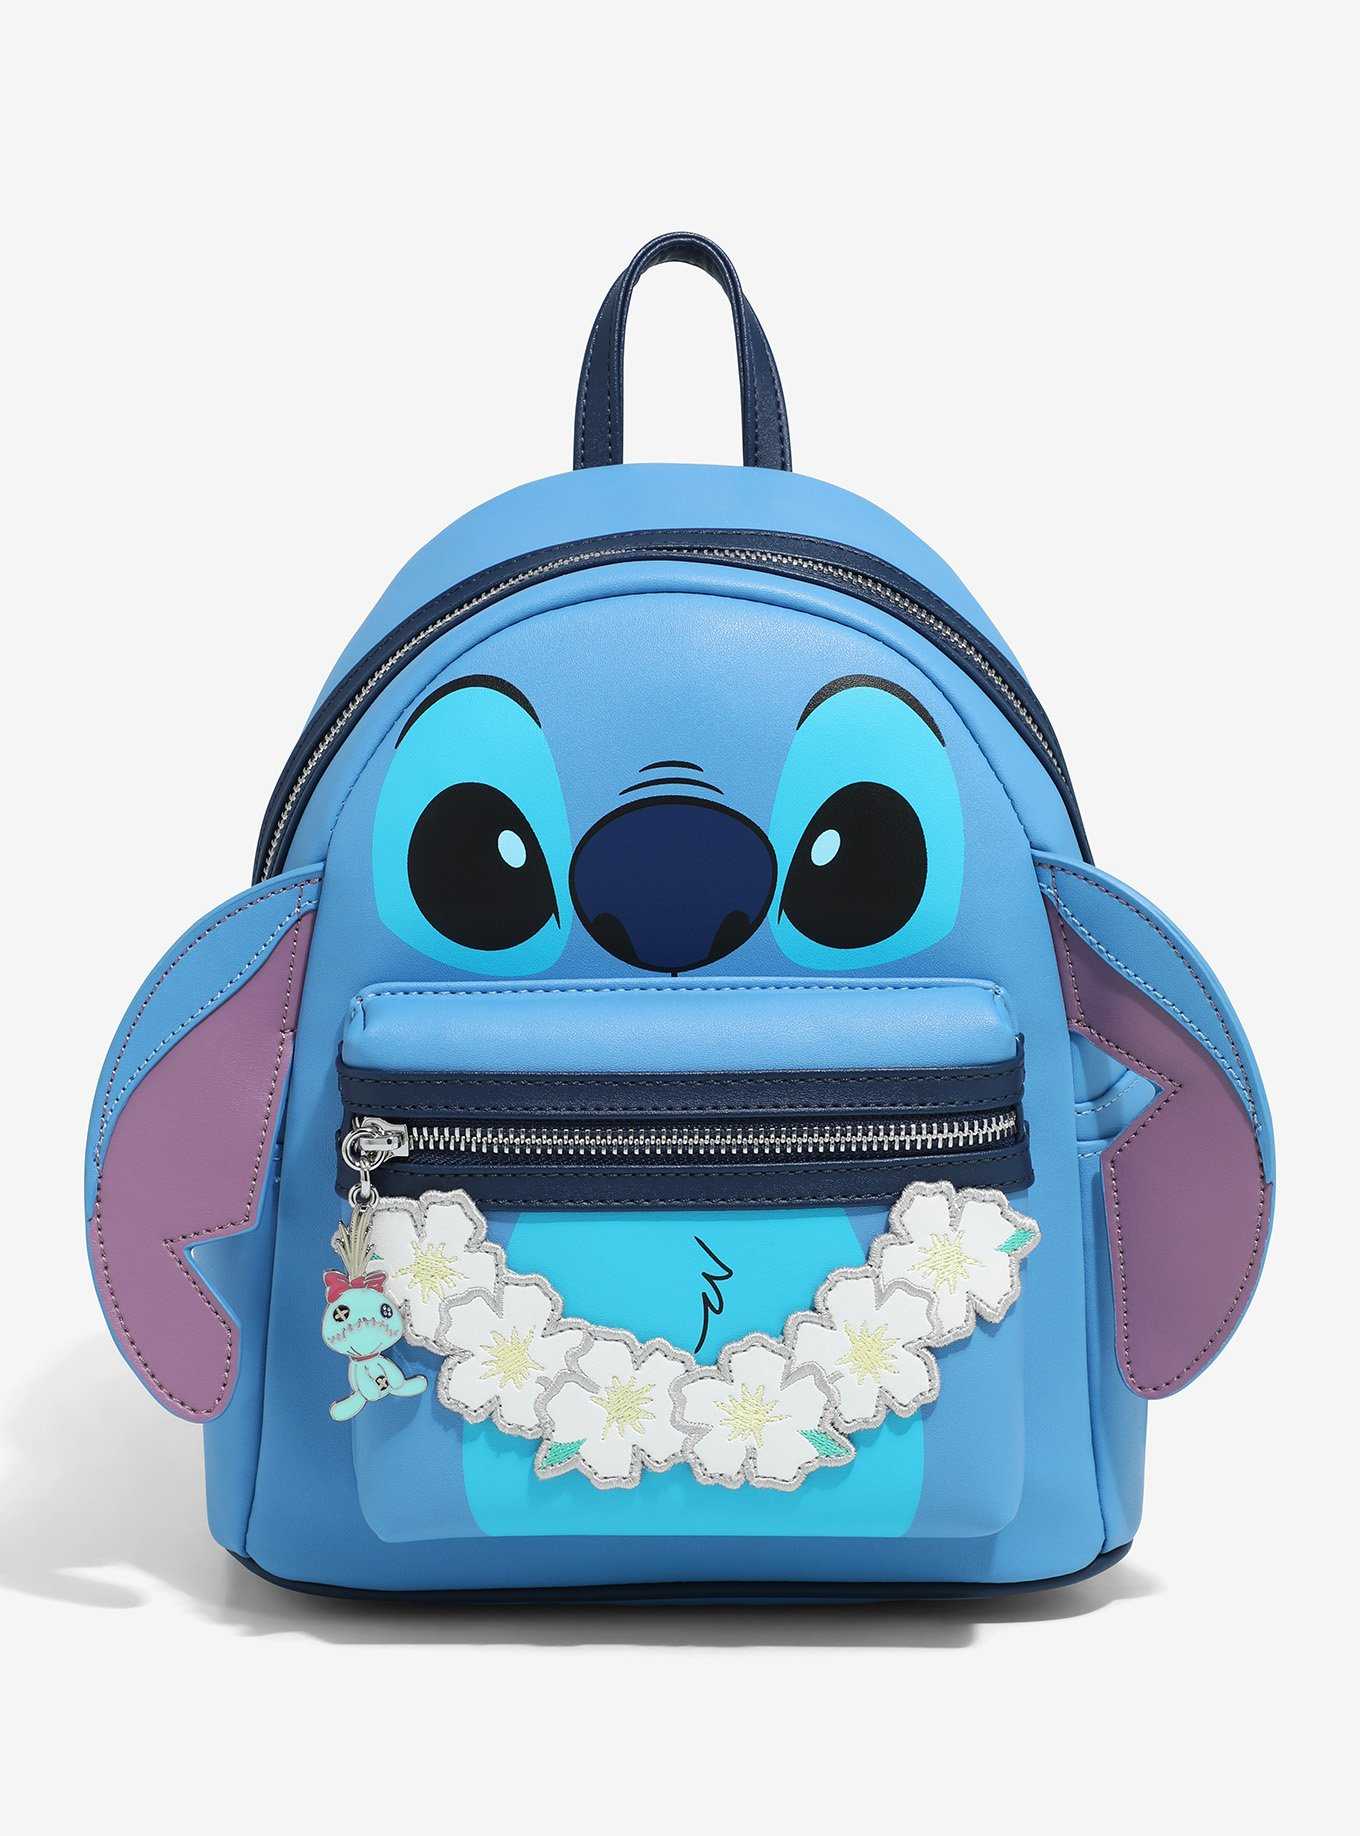 Disney Lilo & Stitch Large Stitch, Officially Licensed Kids Toys for Ages 2  Up by Just Play